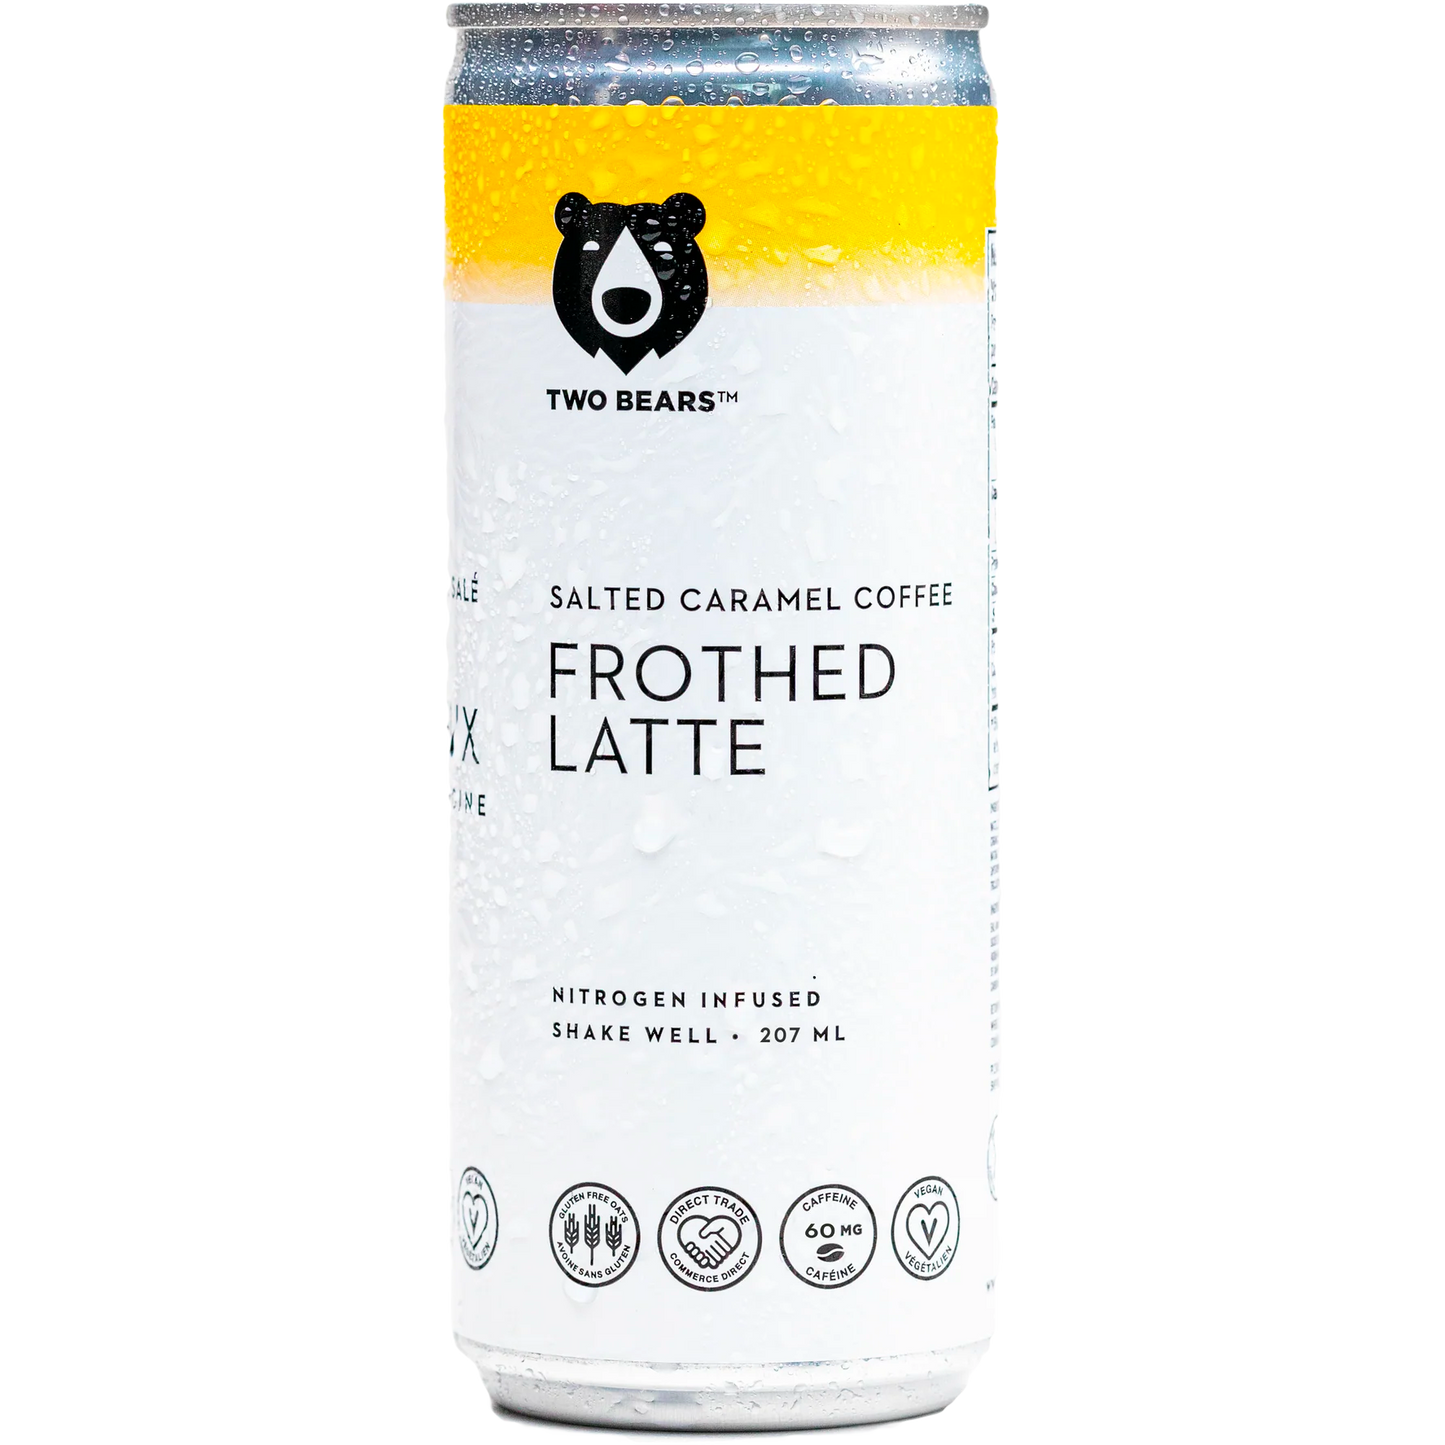 Two Bears Frothed Salted Caramel Oat Latte (207mL)